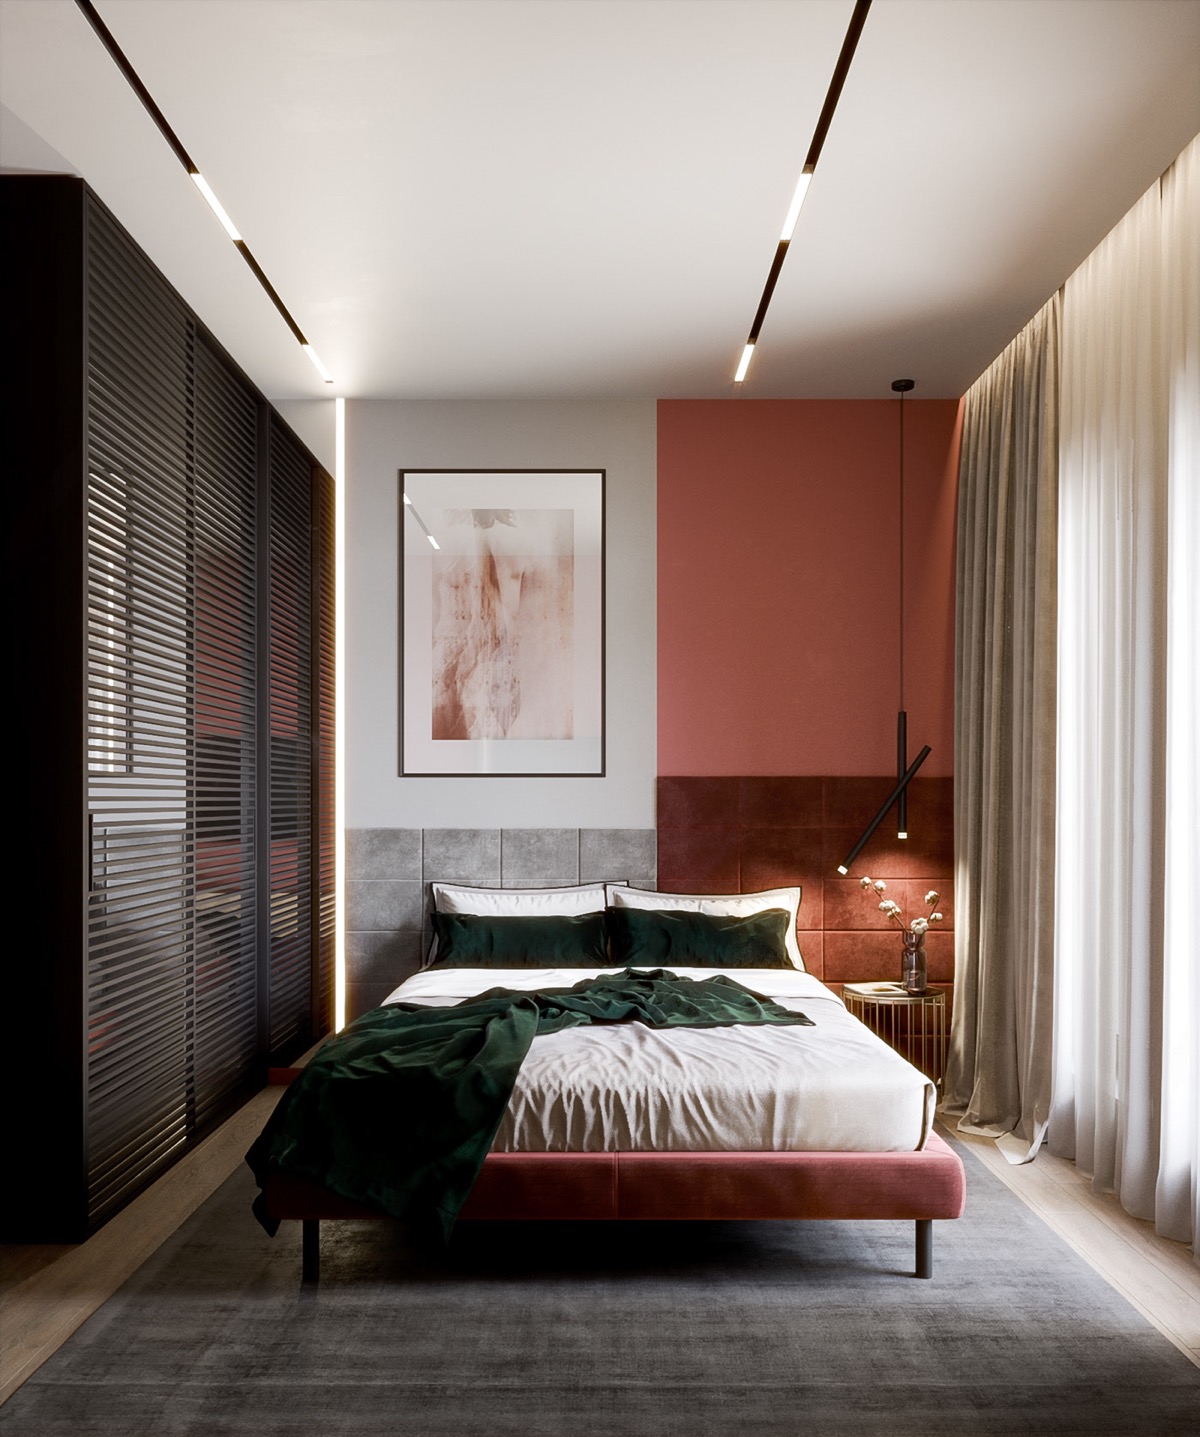 grey-and-red-bedroom-600x719.jpg